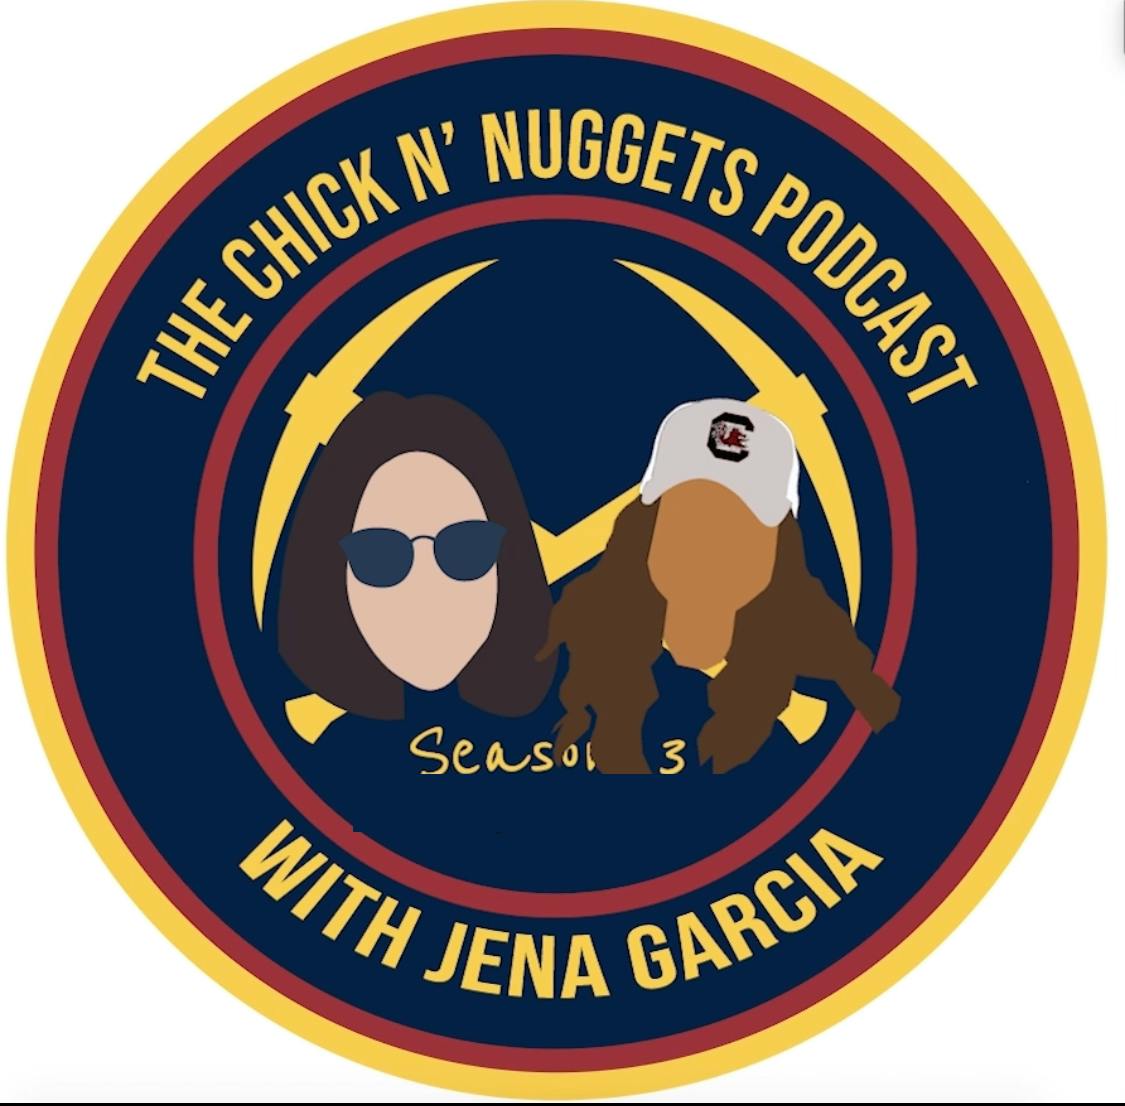 NBA Play-In tournament fun | The Chick N' Nuggets Podcast